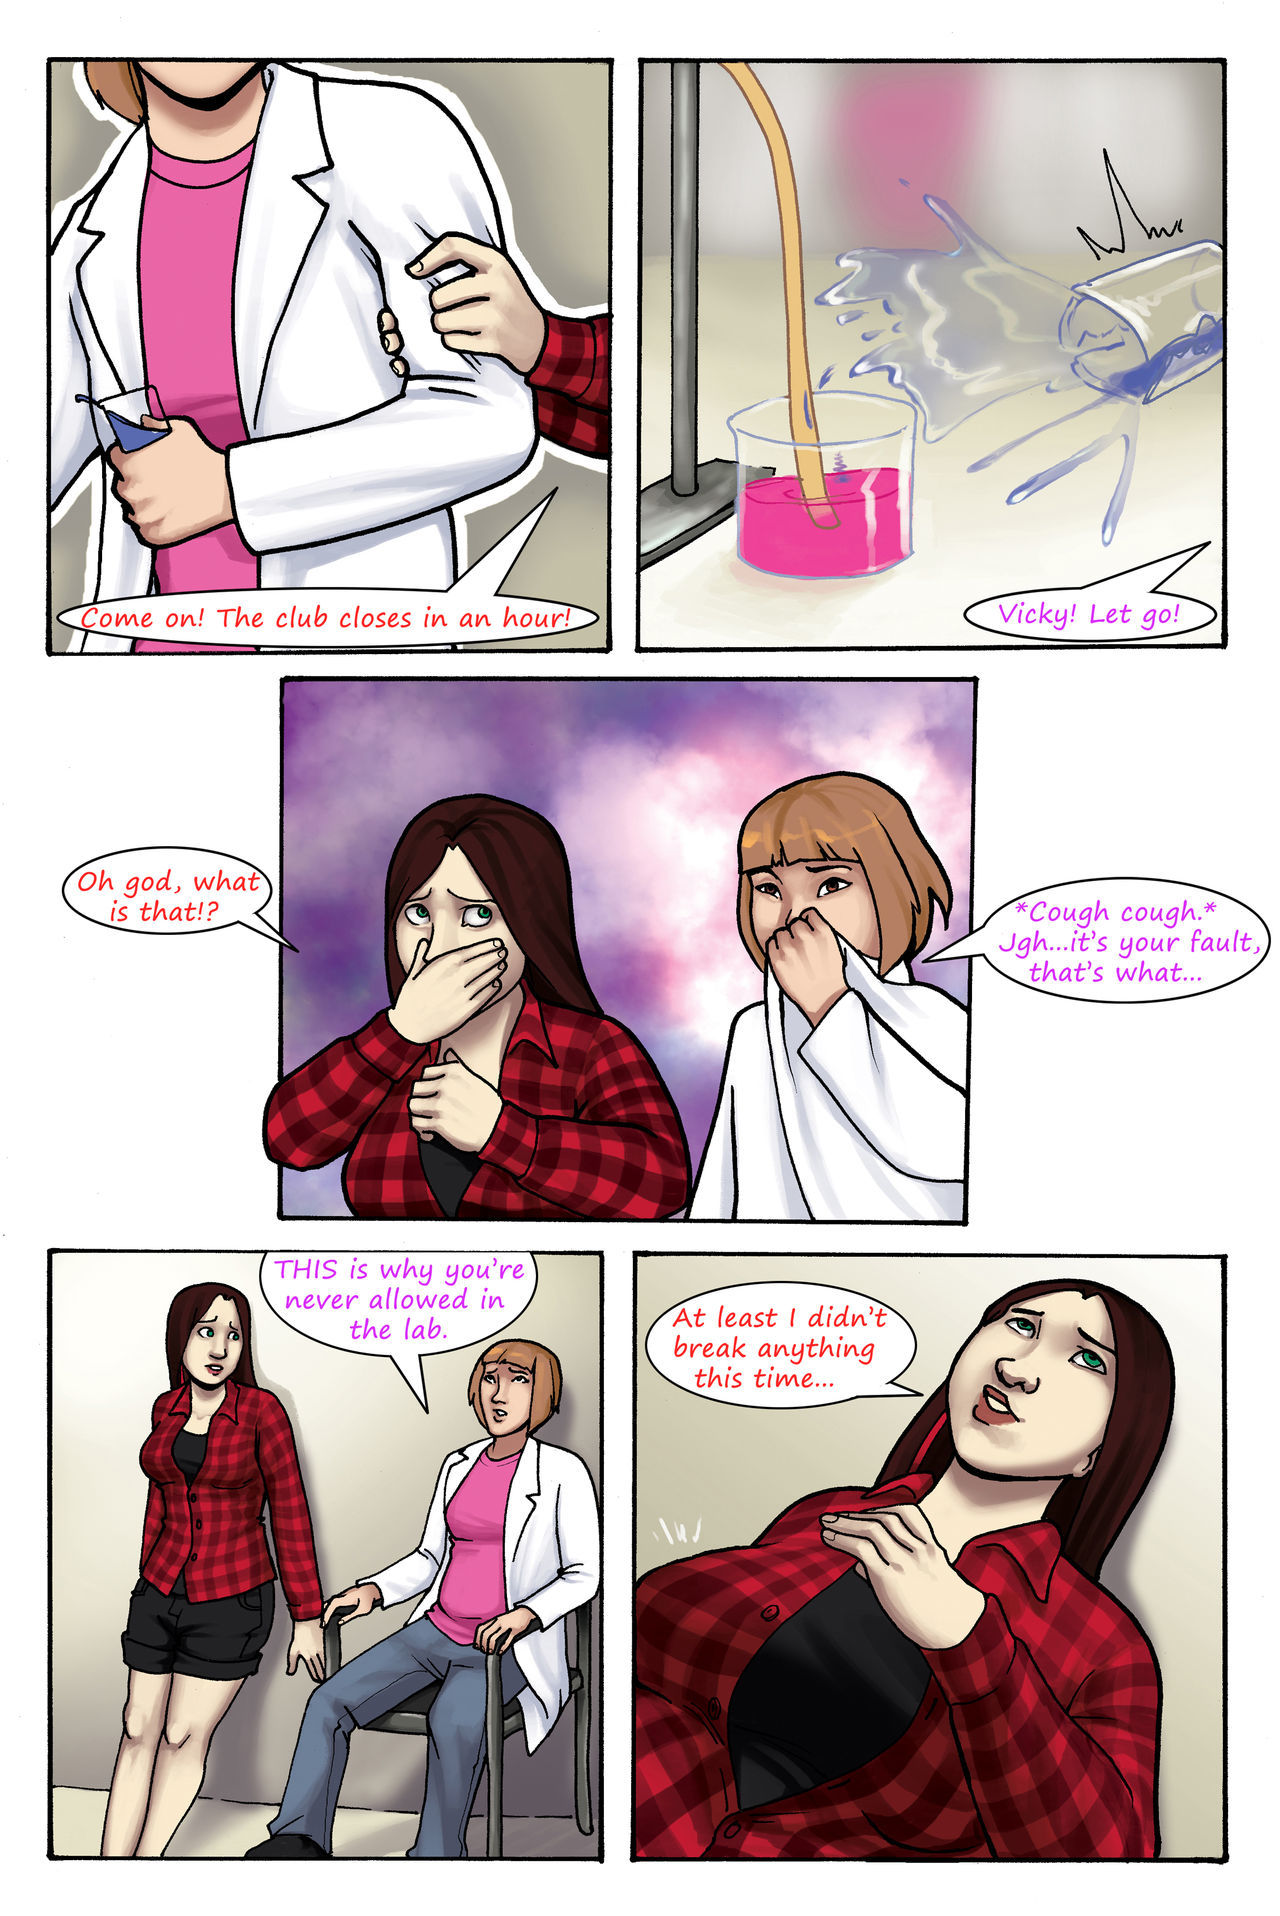 Science Gone Awry by Olympic-Dames page 2